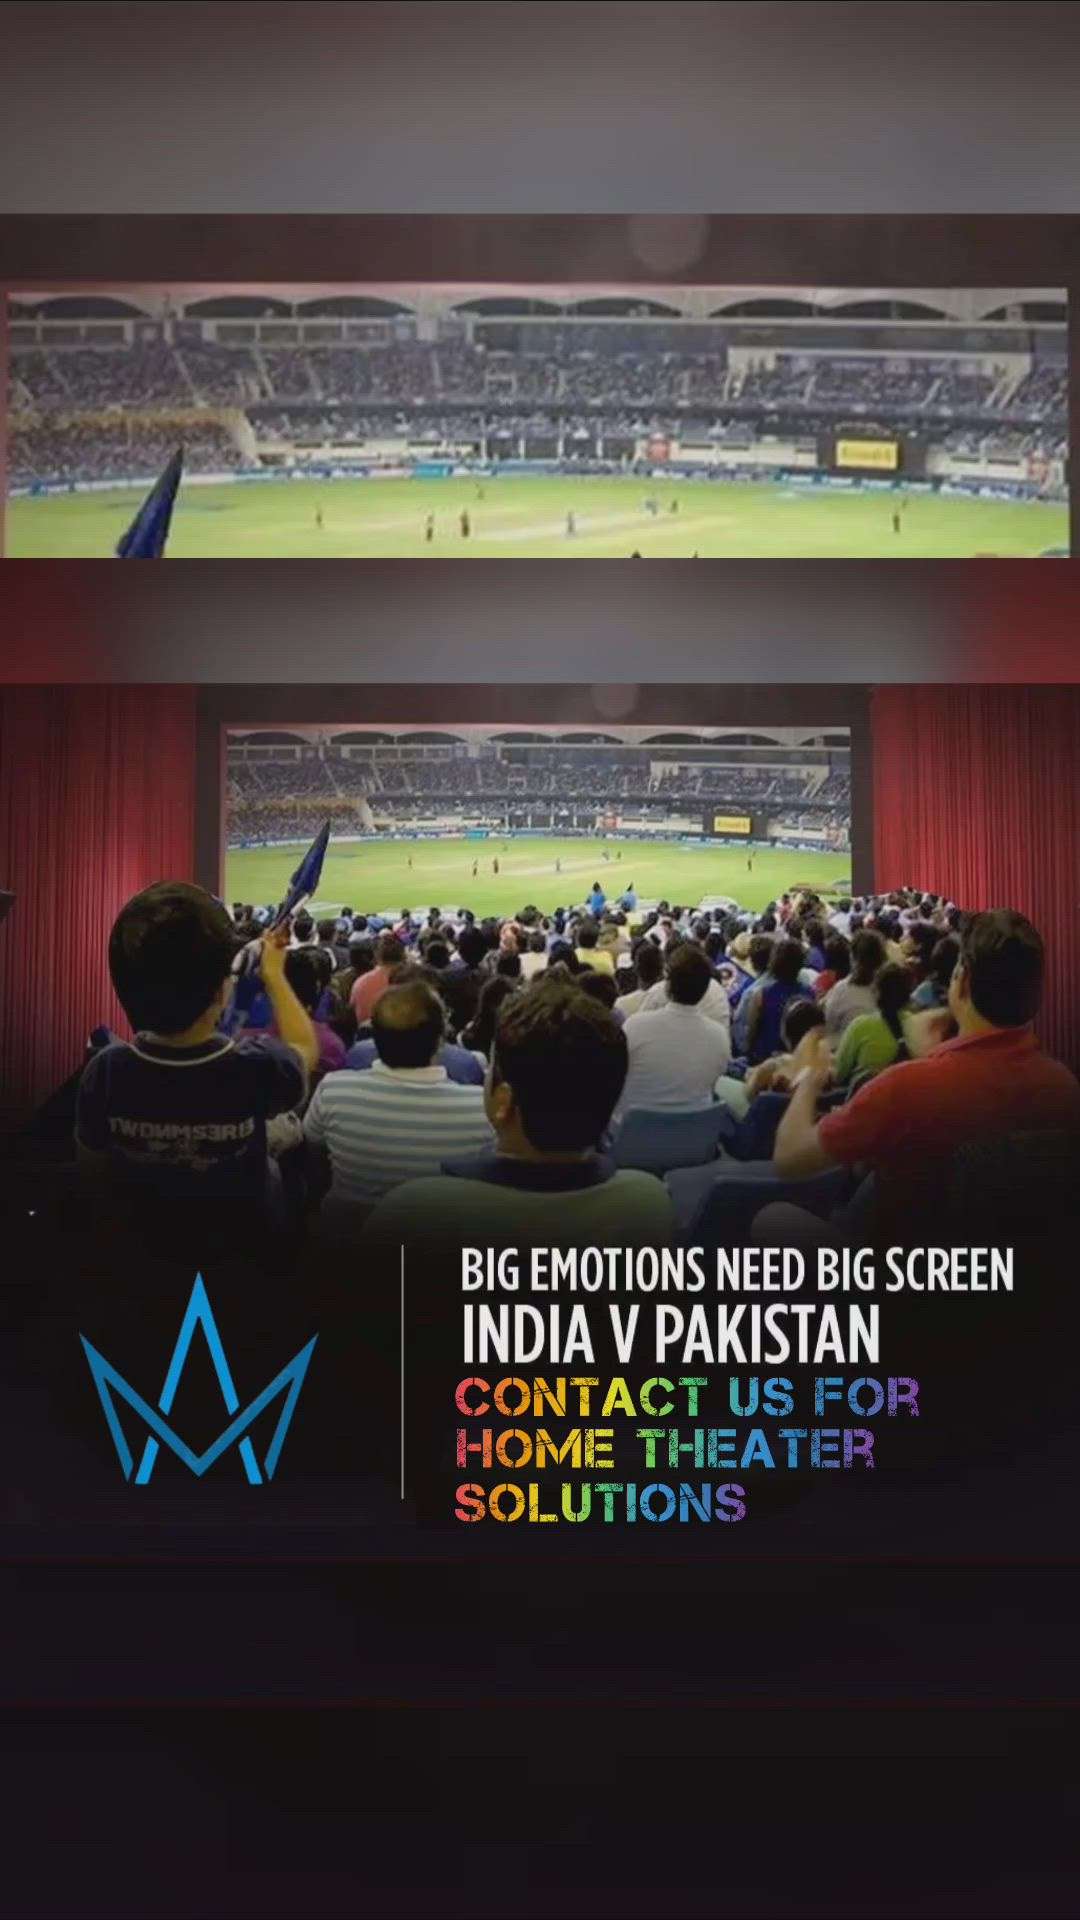 Make a pact to watch the next India Vs Pakistan on the big screen at your home. 

Watch your favorite Sport with immersive theater feel at the comfort of your home. 

Massive 150" Screen and Dolby Atoms Surround Sound with comfortable Recliners add a drink and some snacks
What more could we ask for?

Contact Us For Turnkey Home Theater Solutions 

#gameofthrones #houseofthedragon #houseofdragon #houseofthedragons #houseofdragon #gameofthronesprequel  #homeautomationsystem #smartcurtain #hometheater #hometheatre #hometheaterexperts #hometheaterdesign #homegoals #movietime  #luxuryhomes #luxurious #dreamhome #perfecthouse #smartliving #smarthome #smartblinds #dolby #dolbyatmos #projector #bigscreen #opentheatre  #indiavspakistan #indiancricketteam #indiancricket #cricket